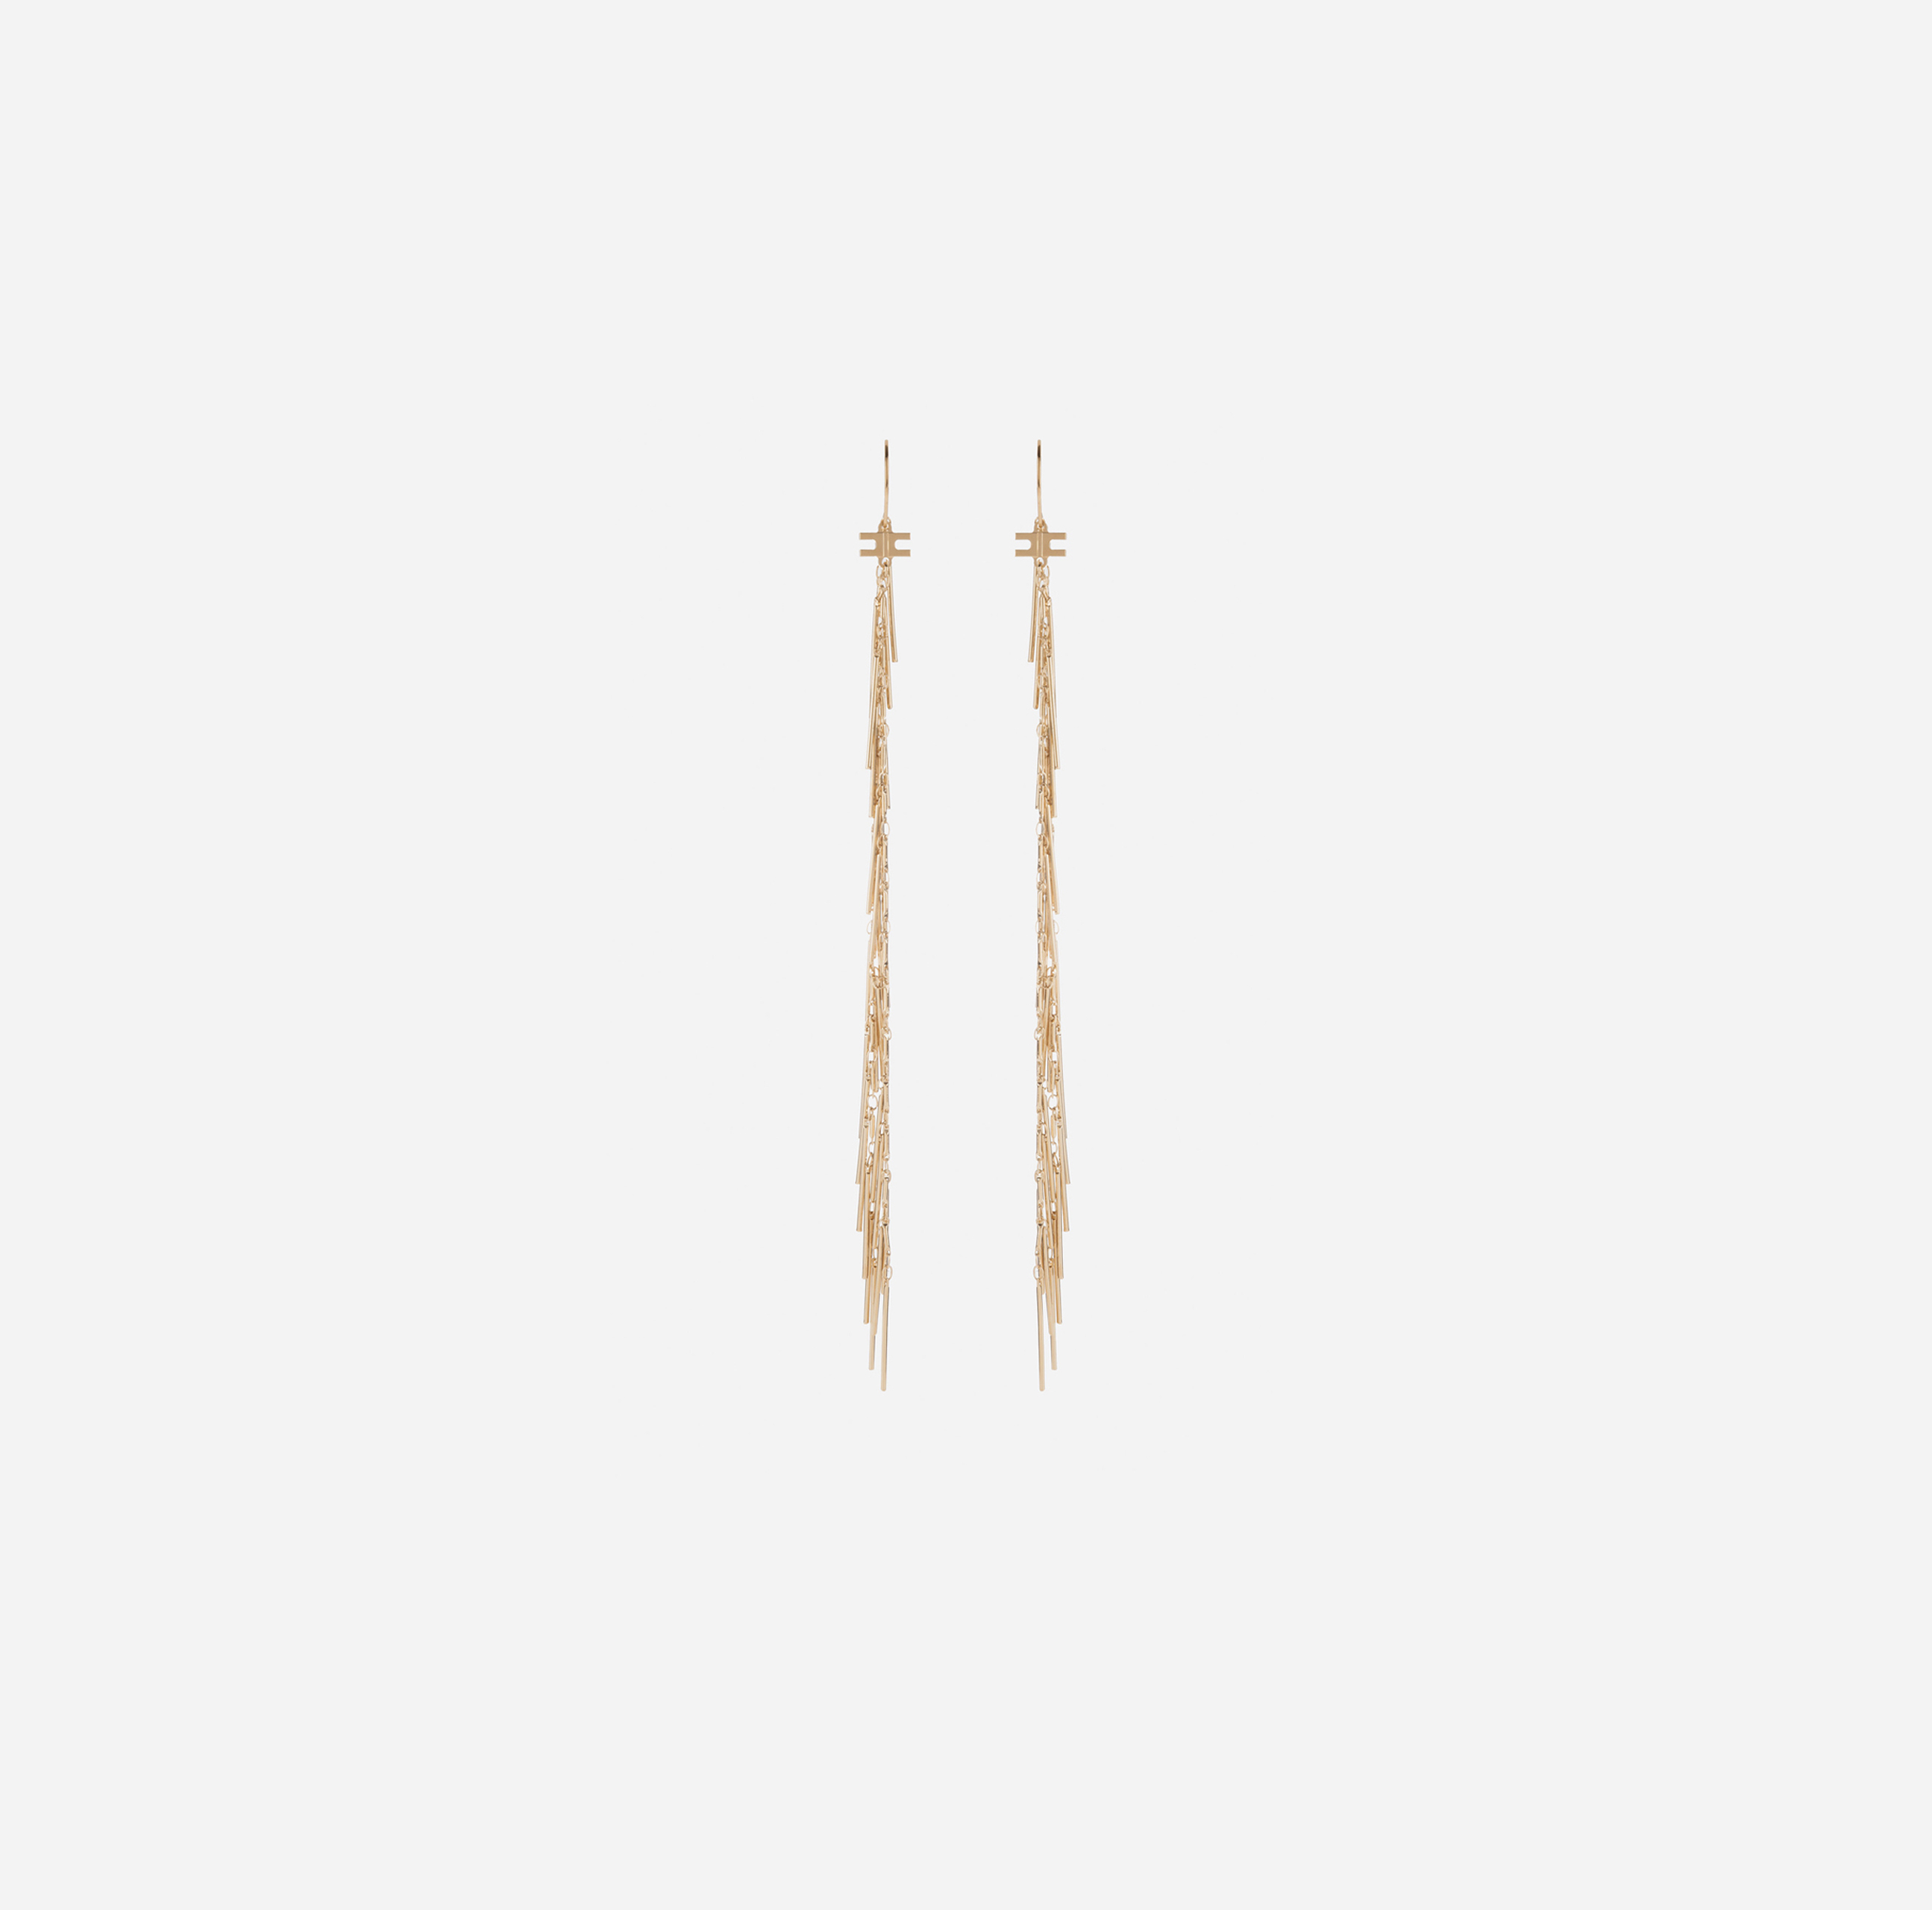 Pendant earring made of chains - Elisabetta Franchi